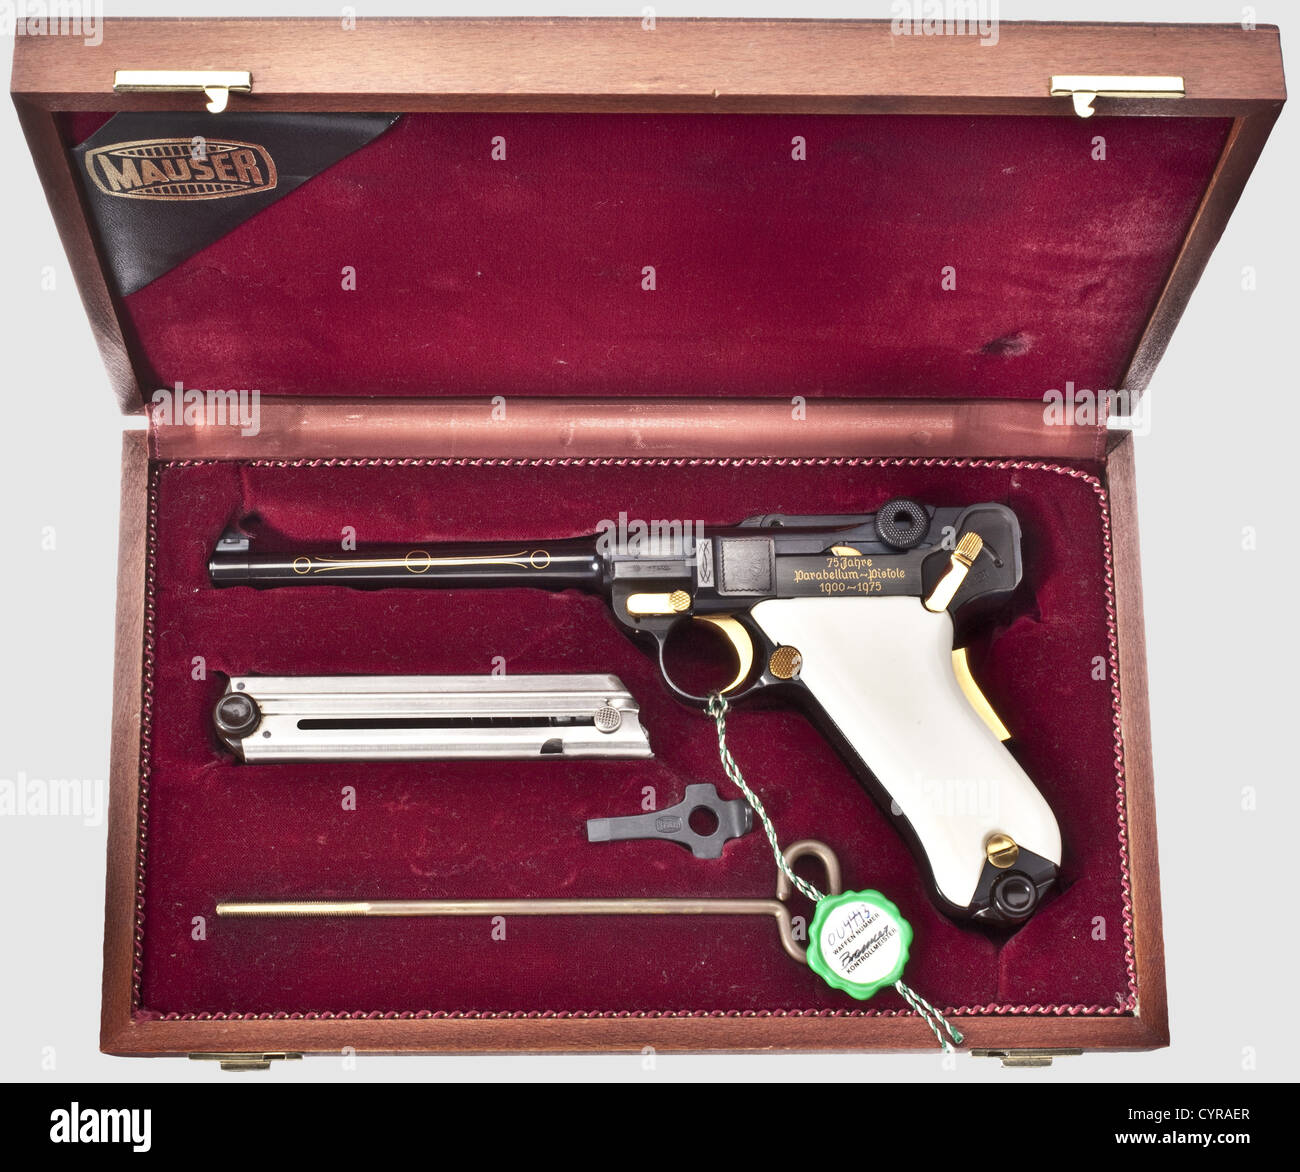 Mauser Parabellum,commemorative de luxe model,in its case,cal. 7.65 Parabellum,no. 10.004443. Matching numbers. Bright bore,barrel length 120 mm. Proof mark: 1973. Grip safety. Mauser barrel on front toggle link,barrel and fork with inlaid gold ornaments,on left side of frame in gold inlaid Gothic lettering '75 Jahre / Parabellum-Pistole / 1900 - 1975',on right side marked 'Meine Ehre heißt Treue'(Loyalty is my sense of honour). High gloss finish. Operational parts gold-plated. Ivory grip panels. Magazine. Comes with a red-brown wooden case,dimensions,Additional-Rights-Clearences-Not Available Stock Photo